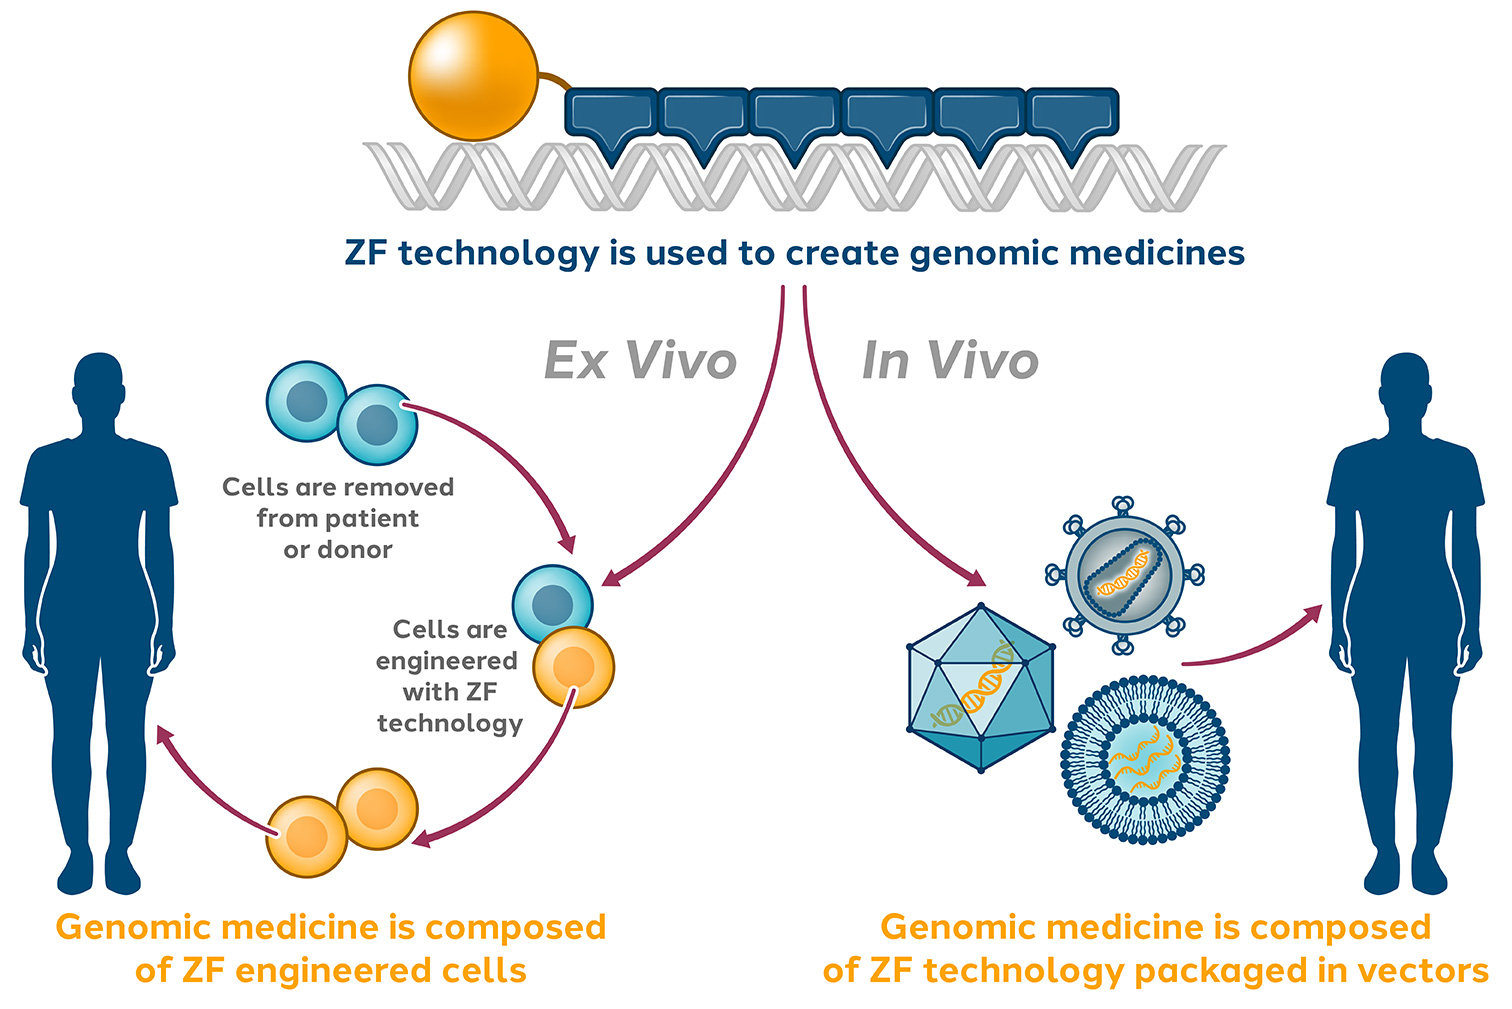 ZF technology is used to create genomic medicines